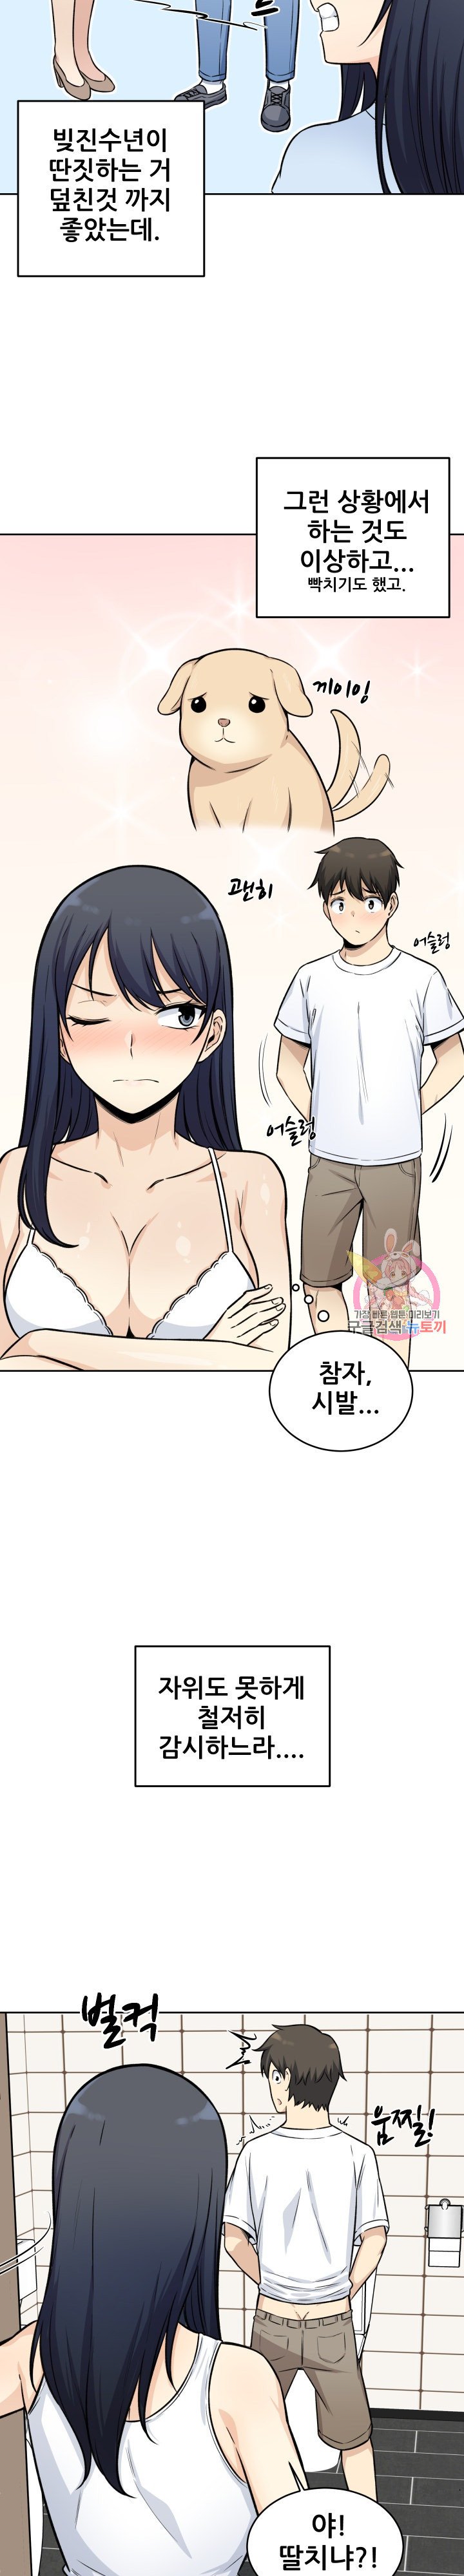 the-ark-is-me-raw-chap-36-2